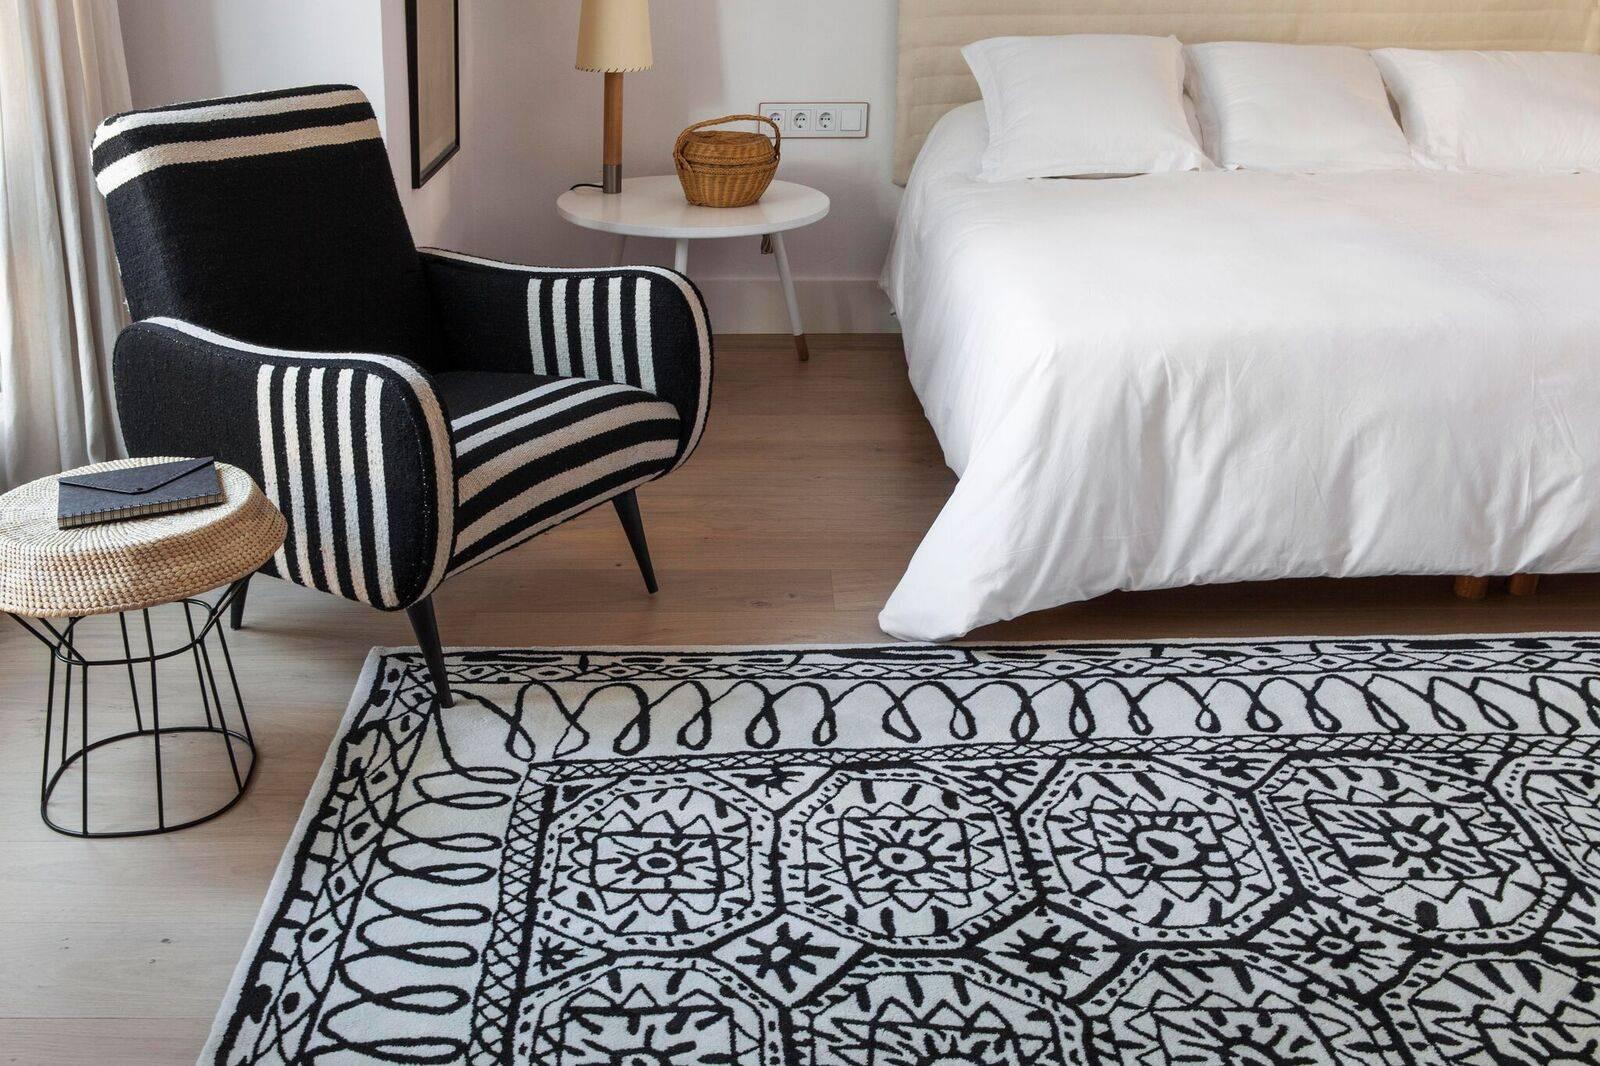 Modern Black on White Estambul Hand-Tufted Wool Rug by Javier Mariscal, Small For Sale